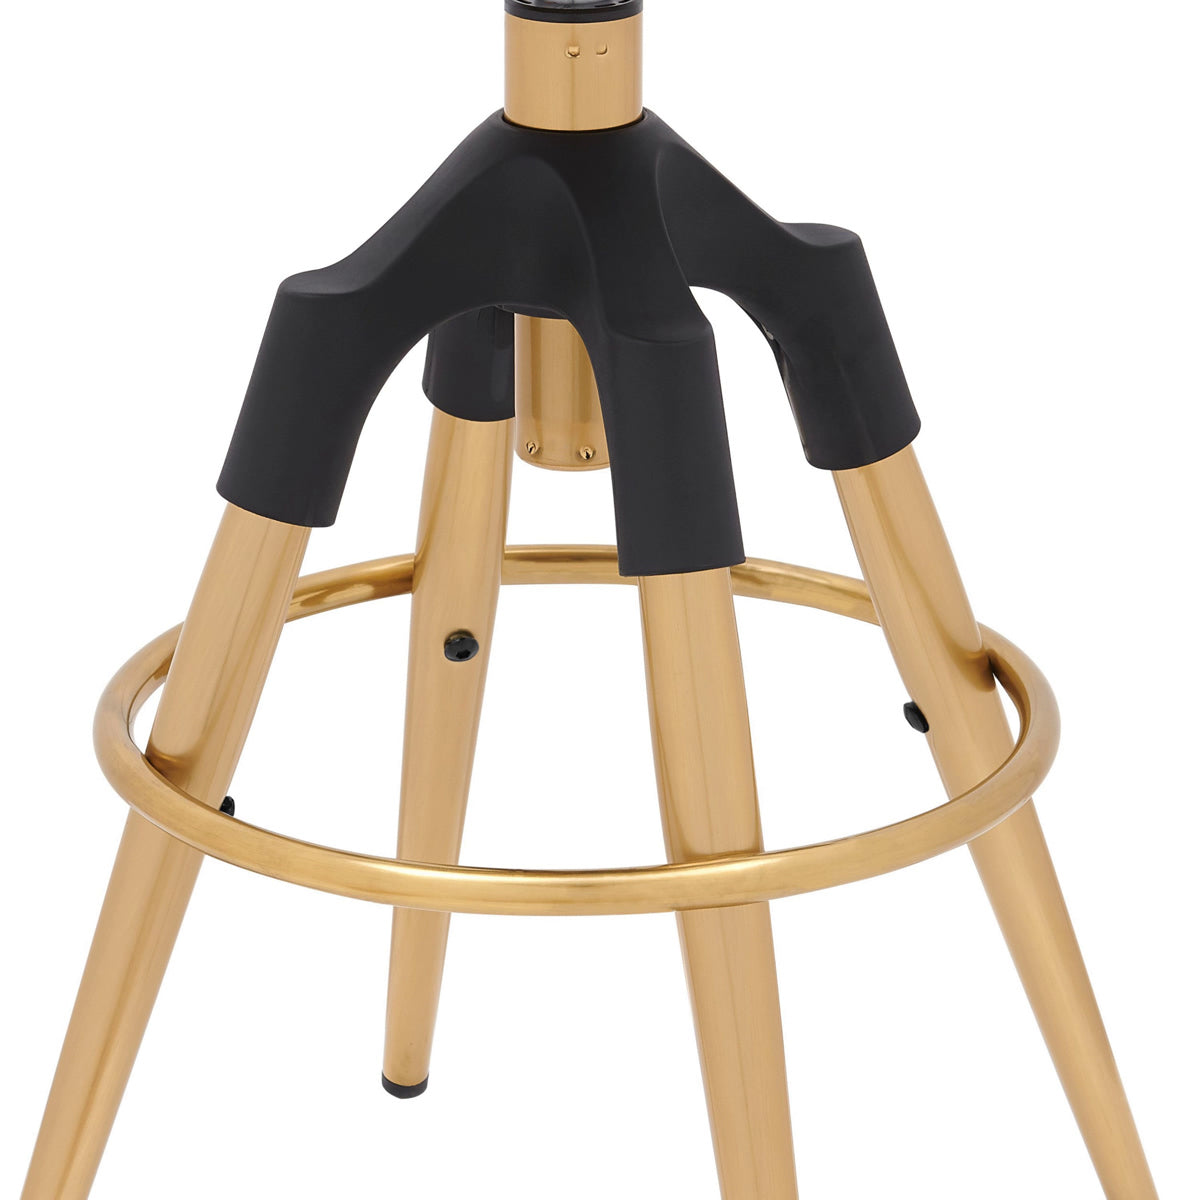 Elton Metal Swivel Backless Stool - Set of 2 by New Pacific Direct - 1350002-G